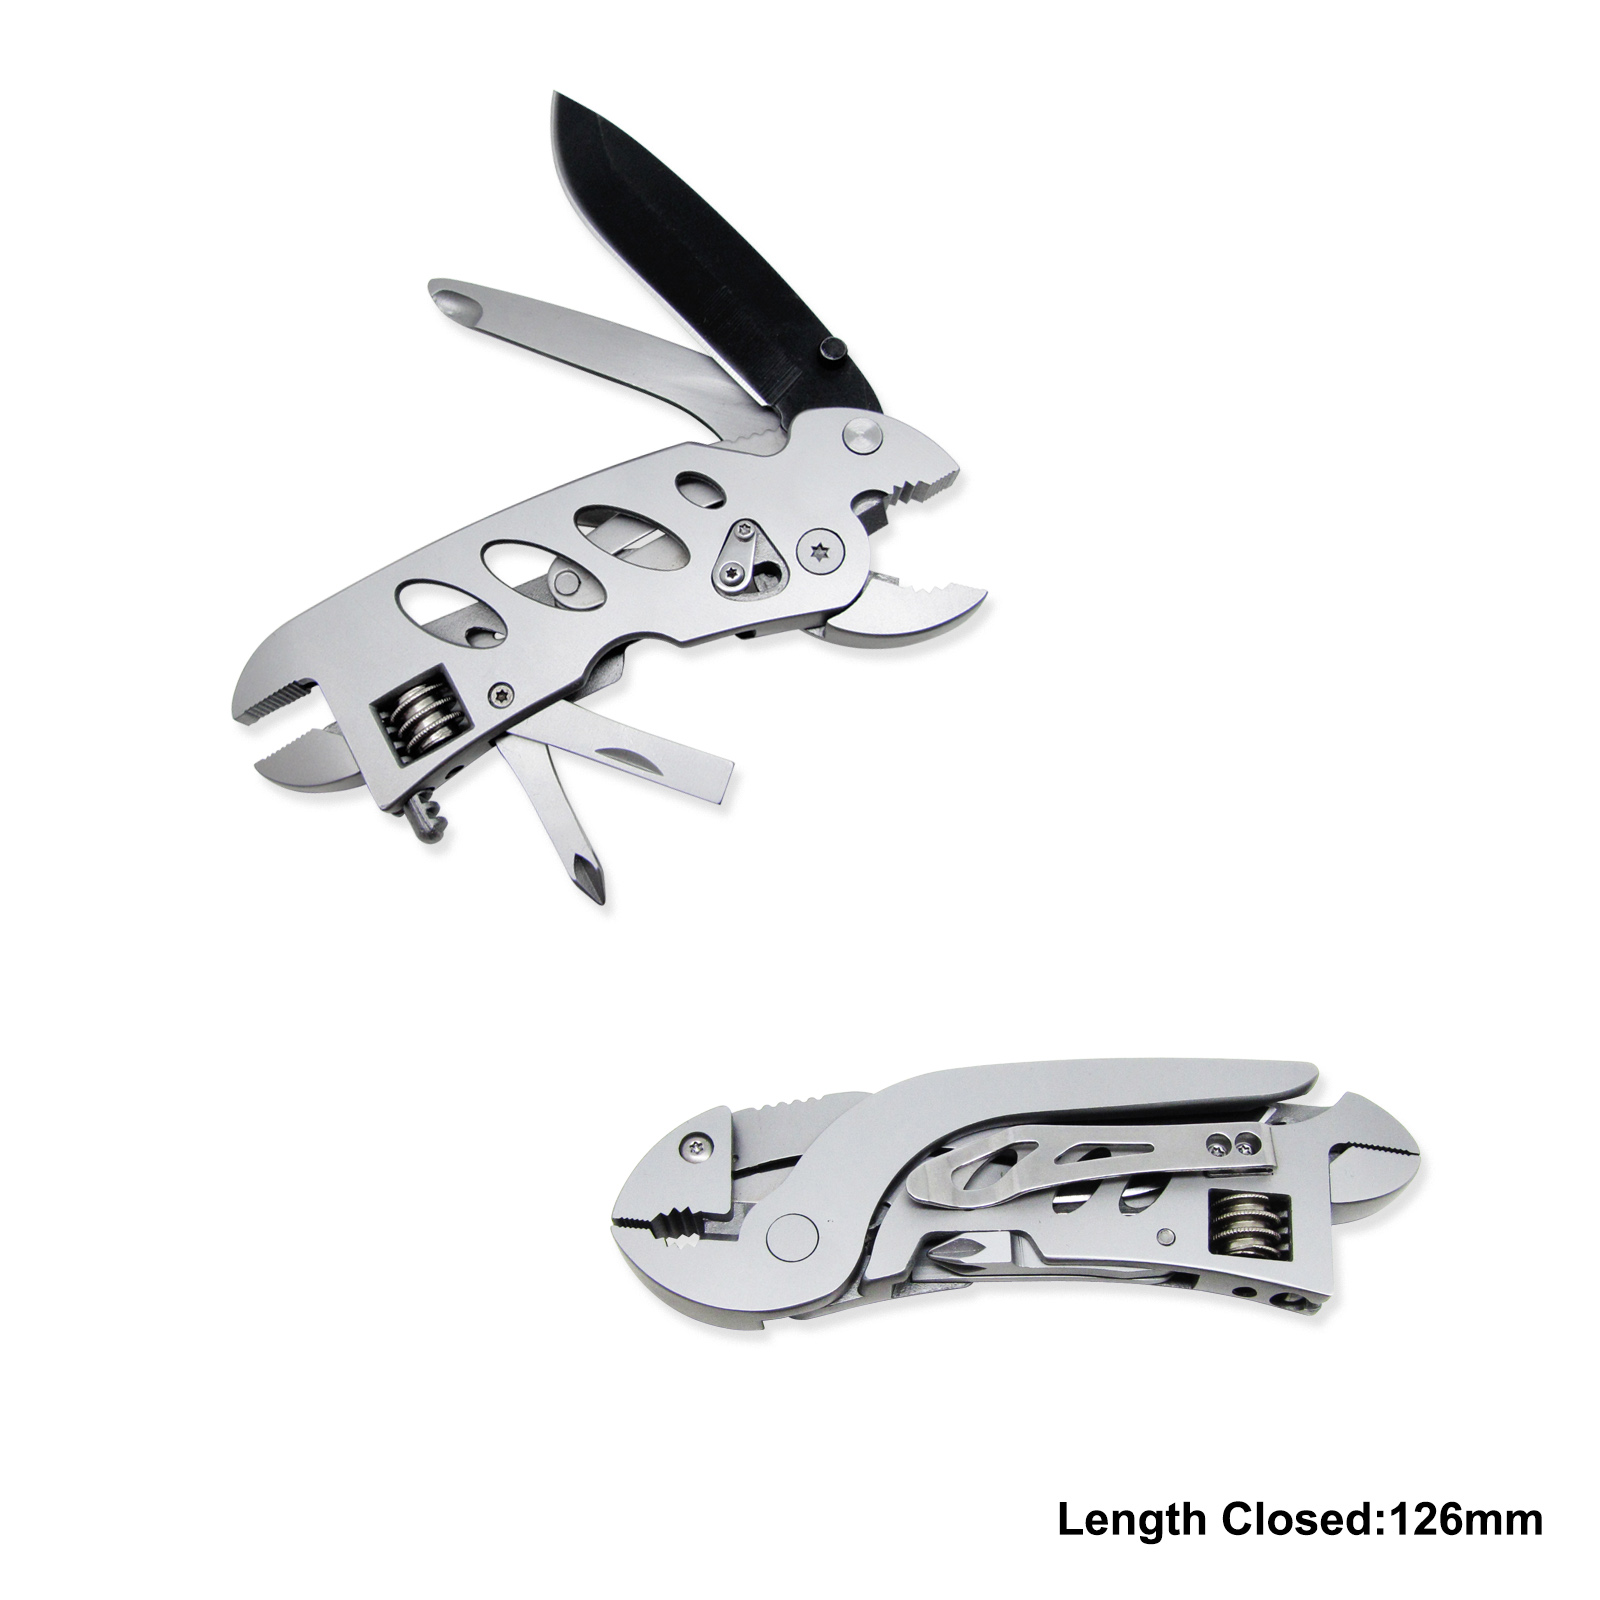 #8289 Multi Function Tool with Compact Design